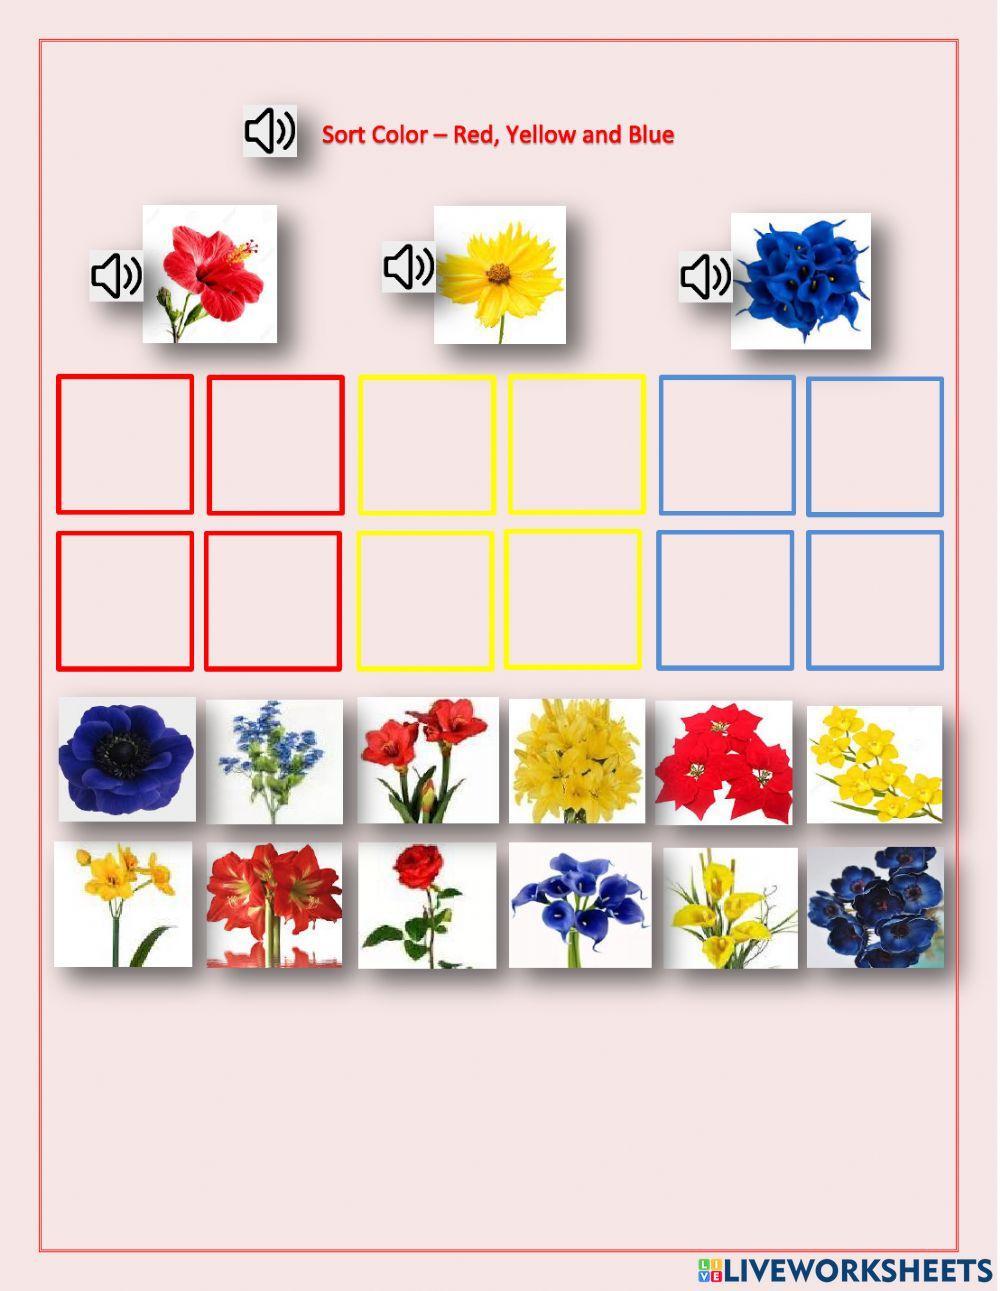 Sort Flower - red, yellow and blue - DC, Emma,George, Neo, LN, Dashly - 1.02